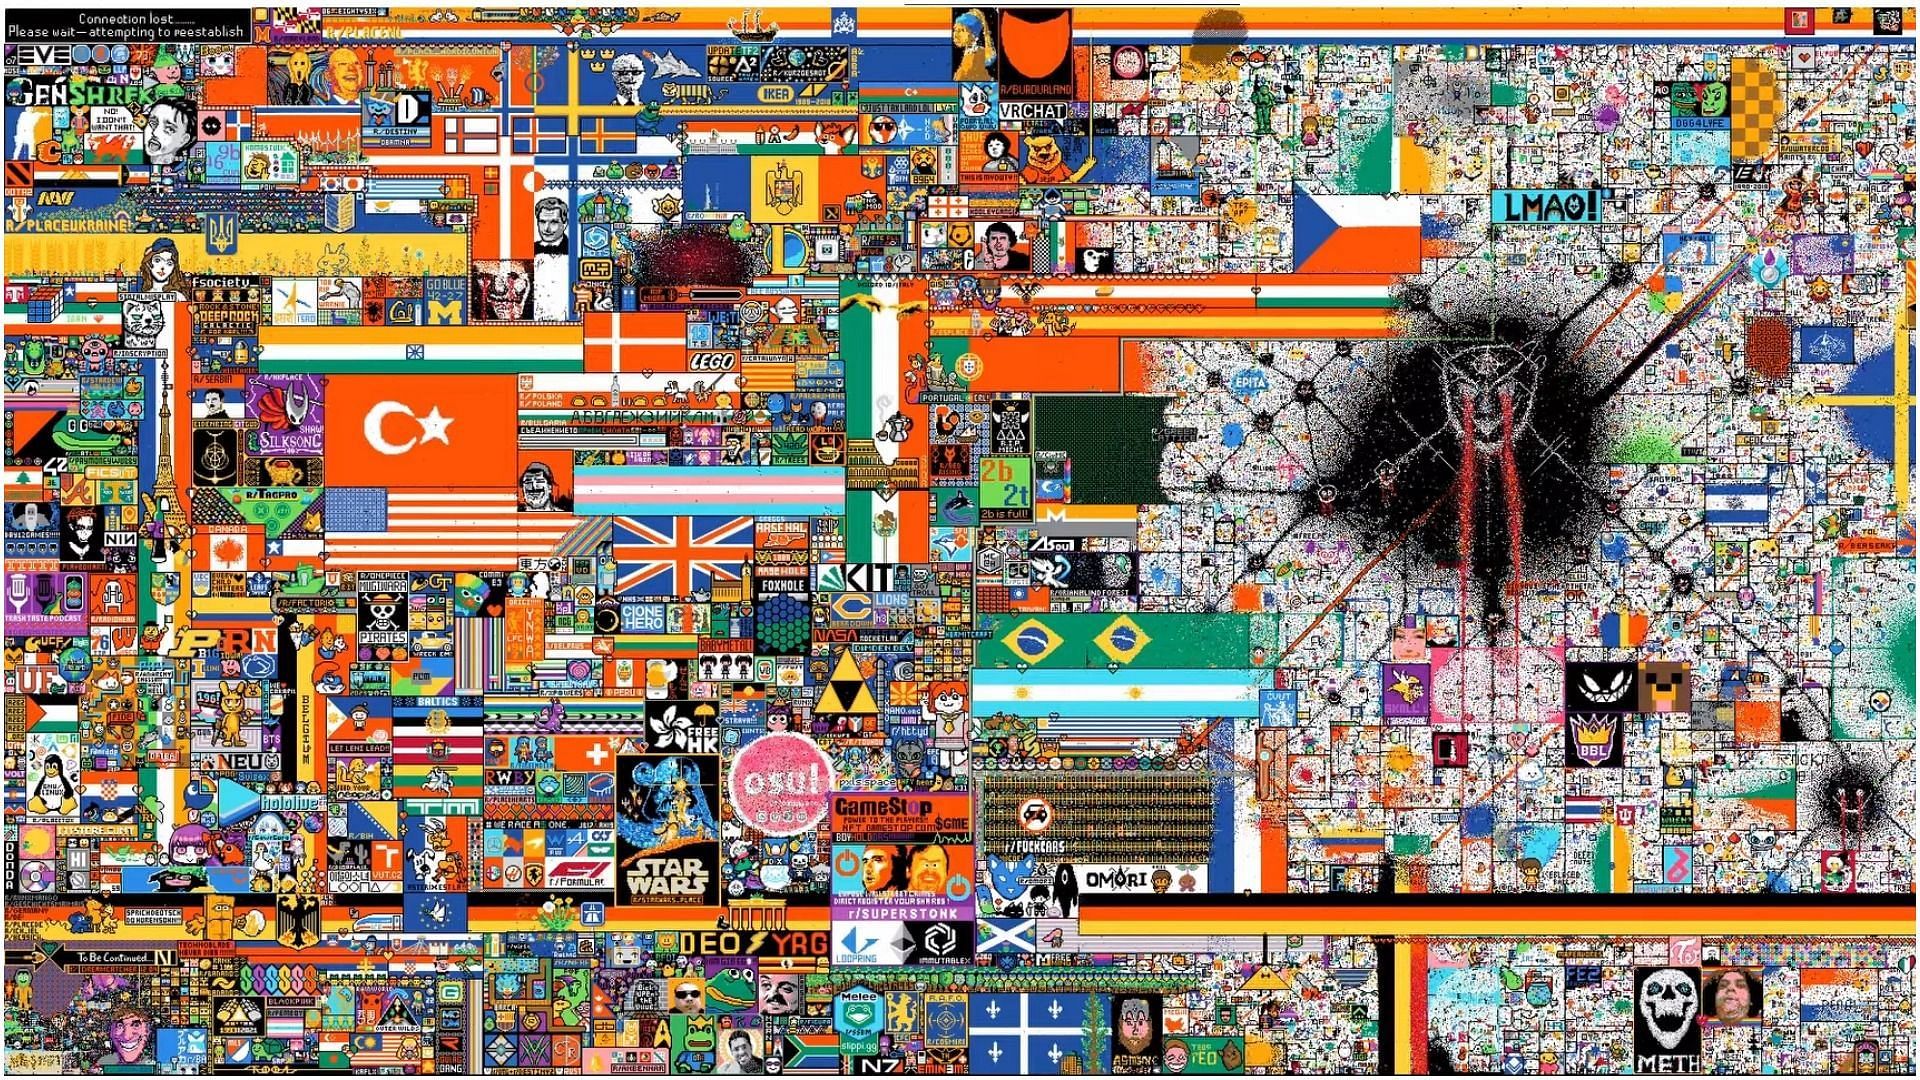 Reddit&#039;s r/Place collaborative art project came back after 5 years of break (Image via FriendlyChimpanzee/YouTube)